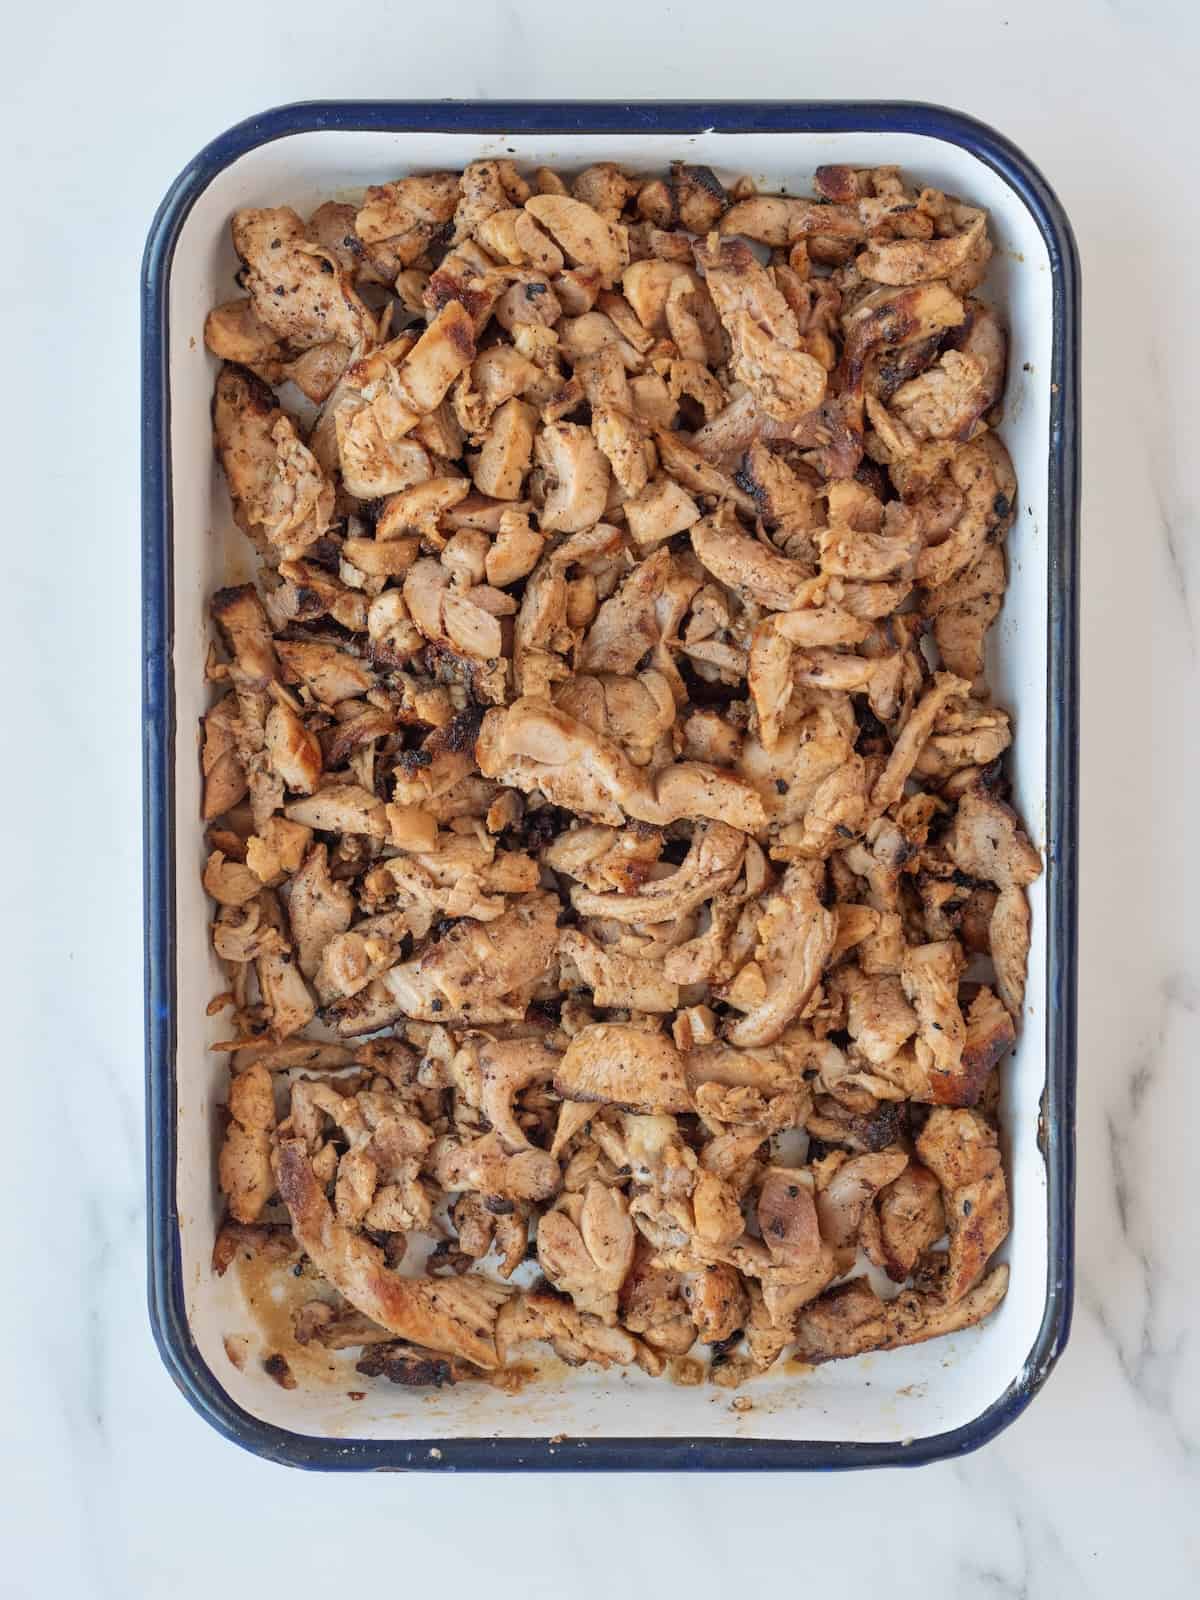 A rectangular dish with grilled chicken thighs sliced against the grain into thin strips.